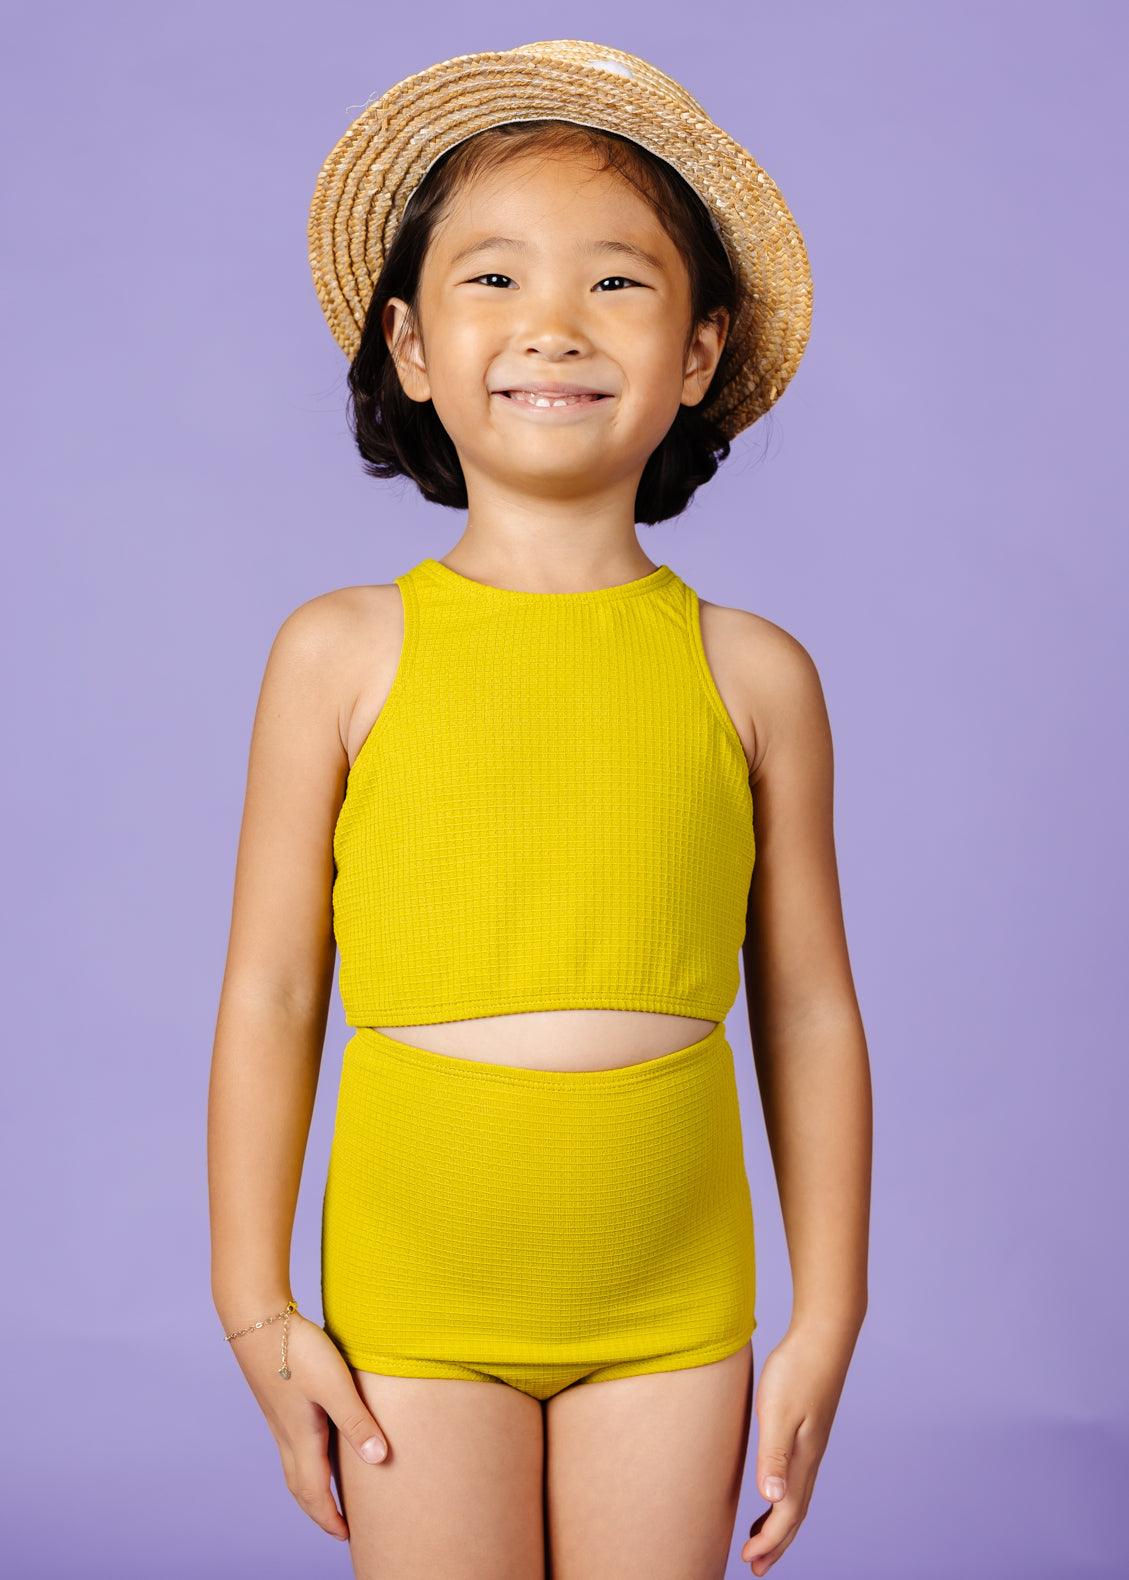 Girls High-Waisted Swimsuit Bottoms - Waffled Pear